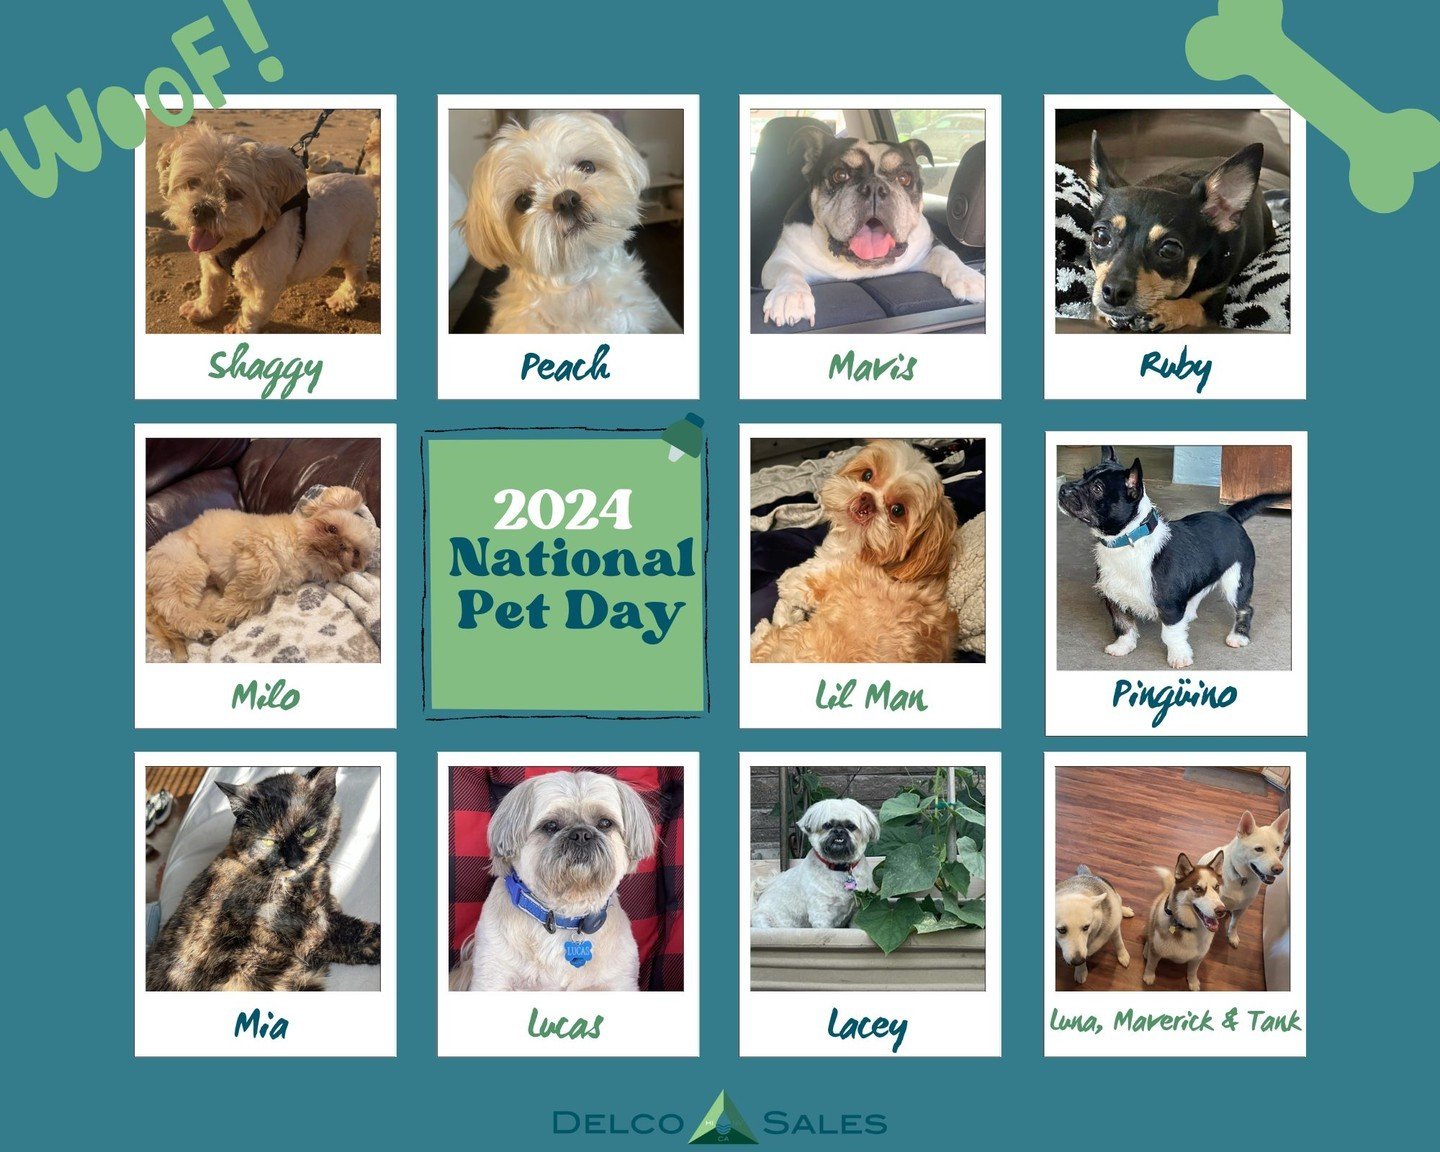 Today is National Pet Day! 🐶🐱🐰

Meet the pets that have the best parents - our Delco team! We&rsquo;re grateful for all our fur babies and the happiness they bring us each day.

P.S. Can you guess the owners to the pets? Drop a comment below ⬇️

#